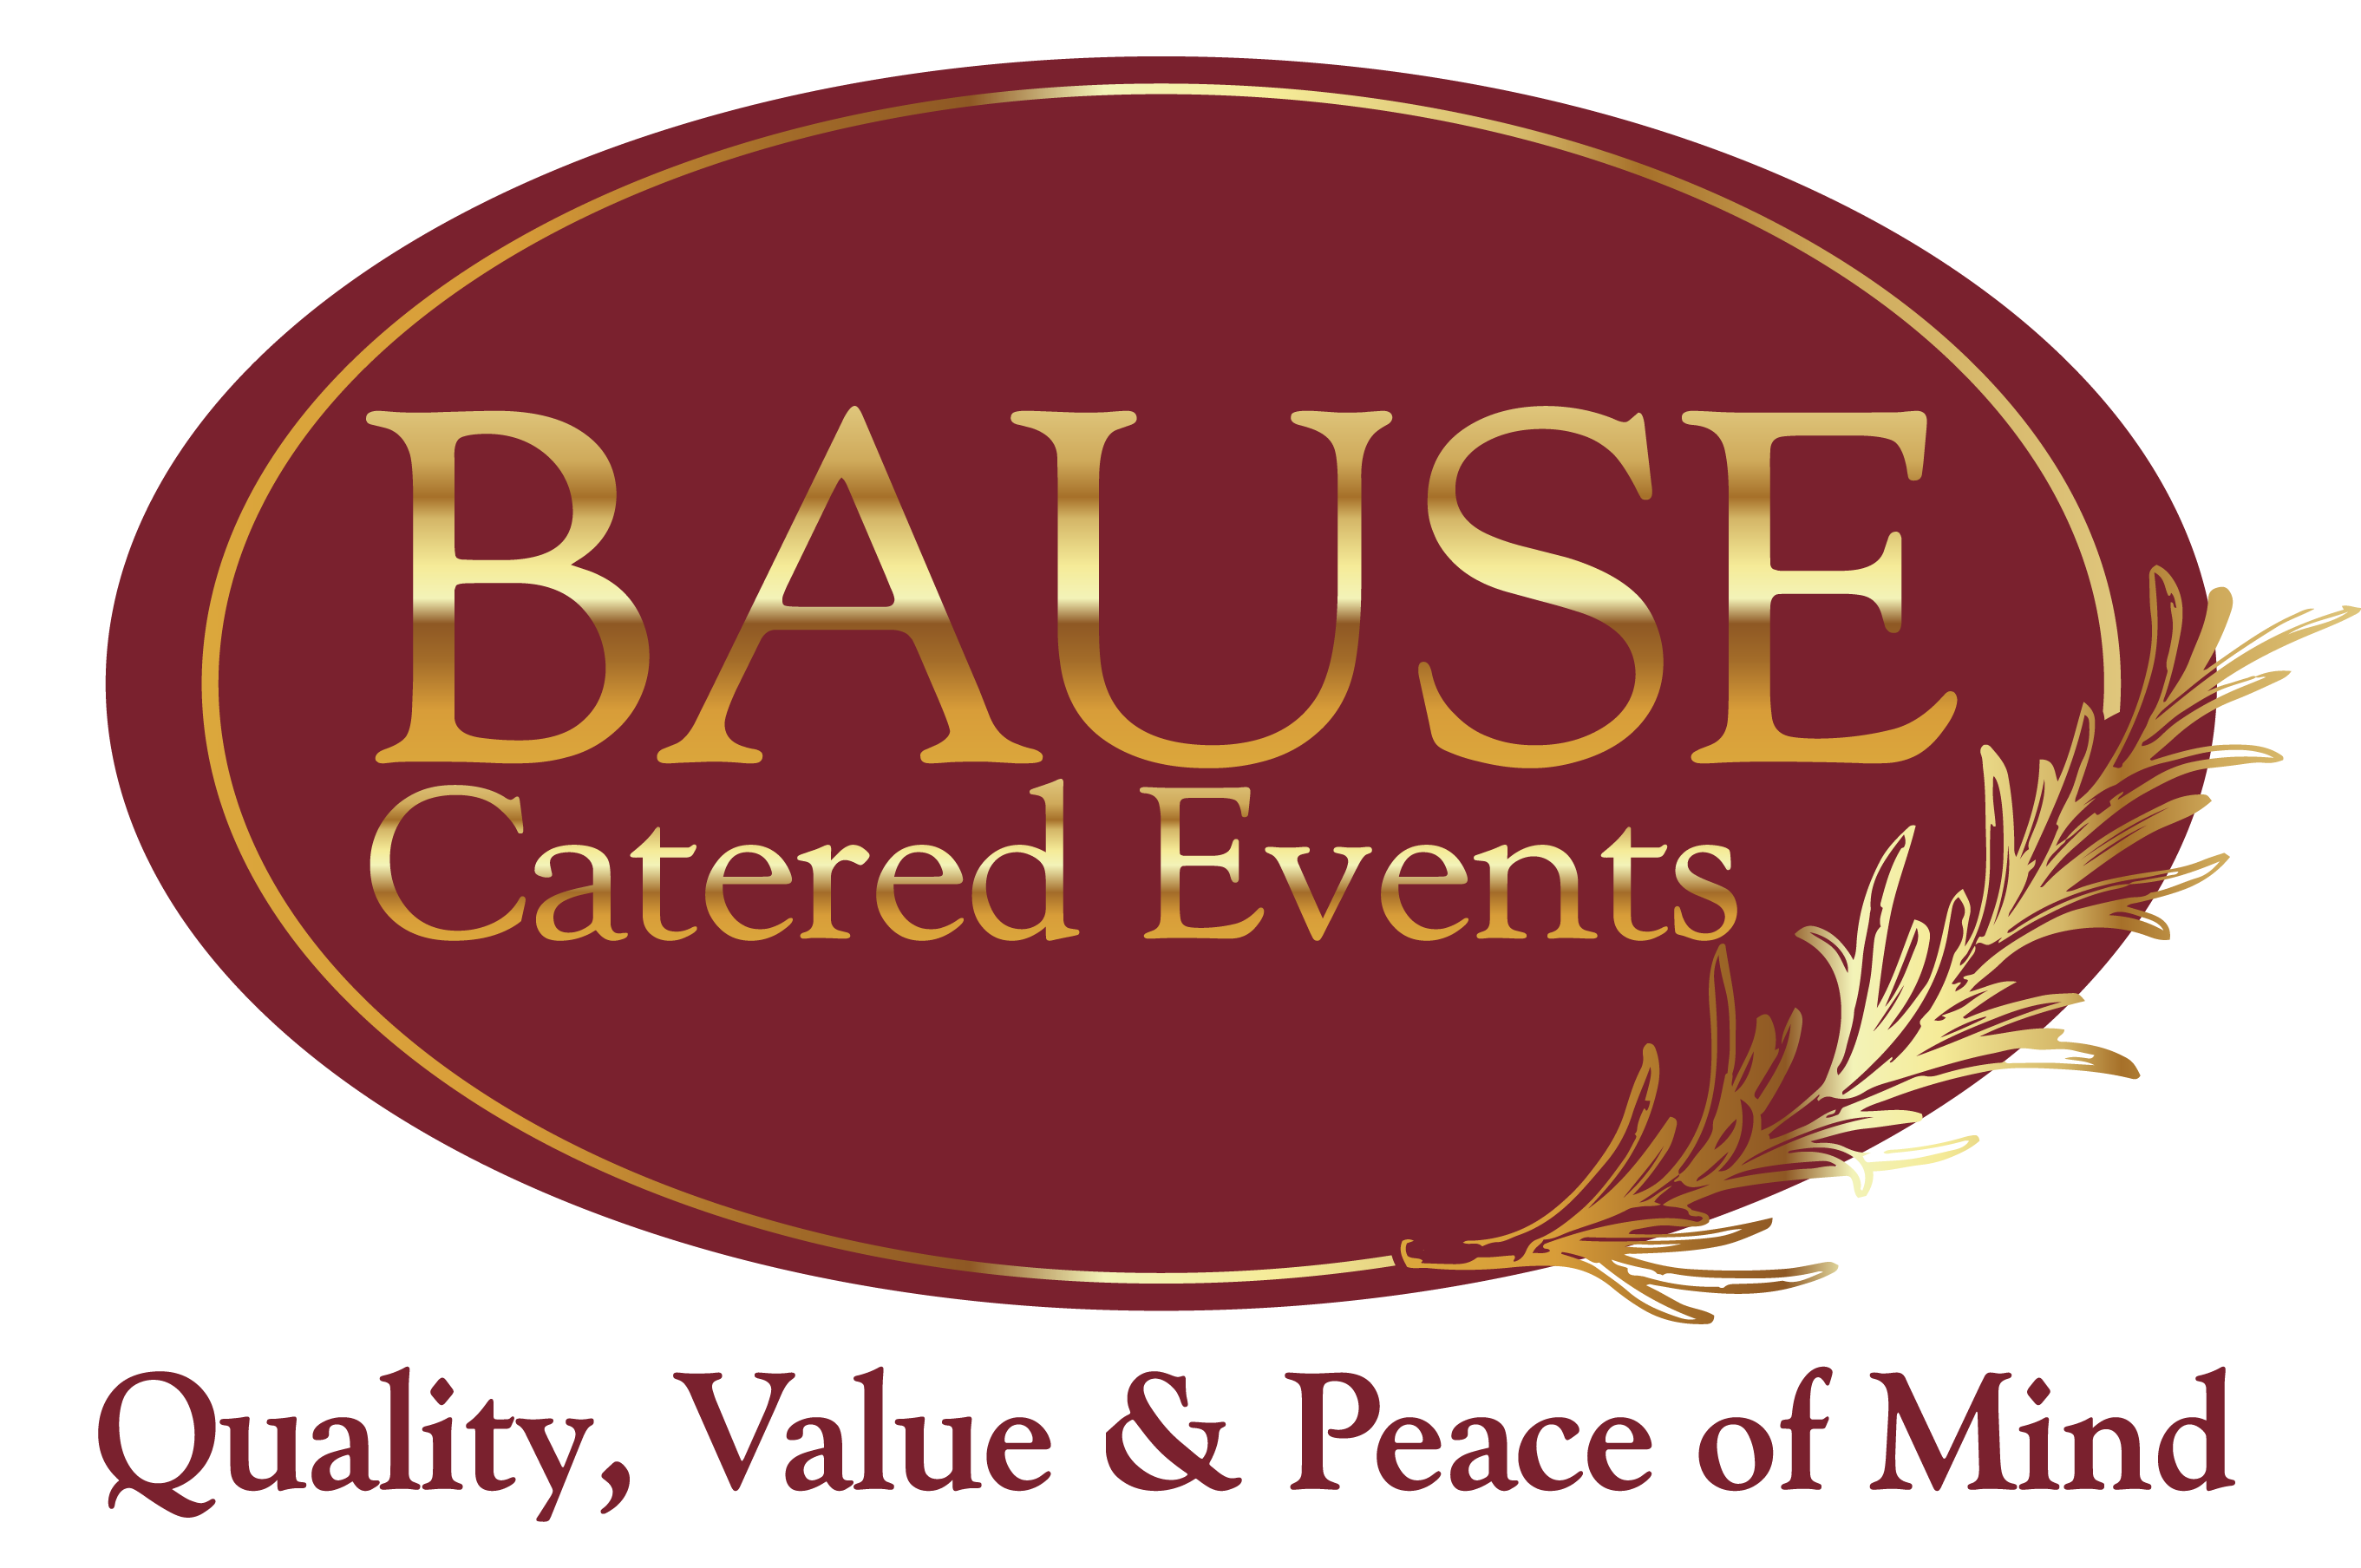 Bause Catered Events